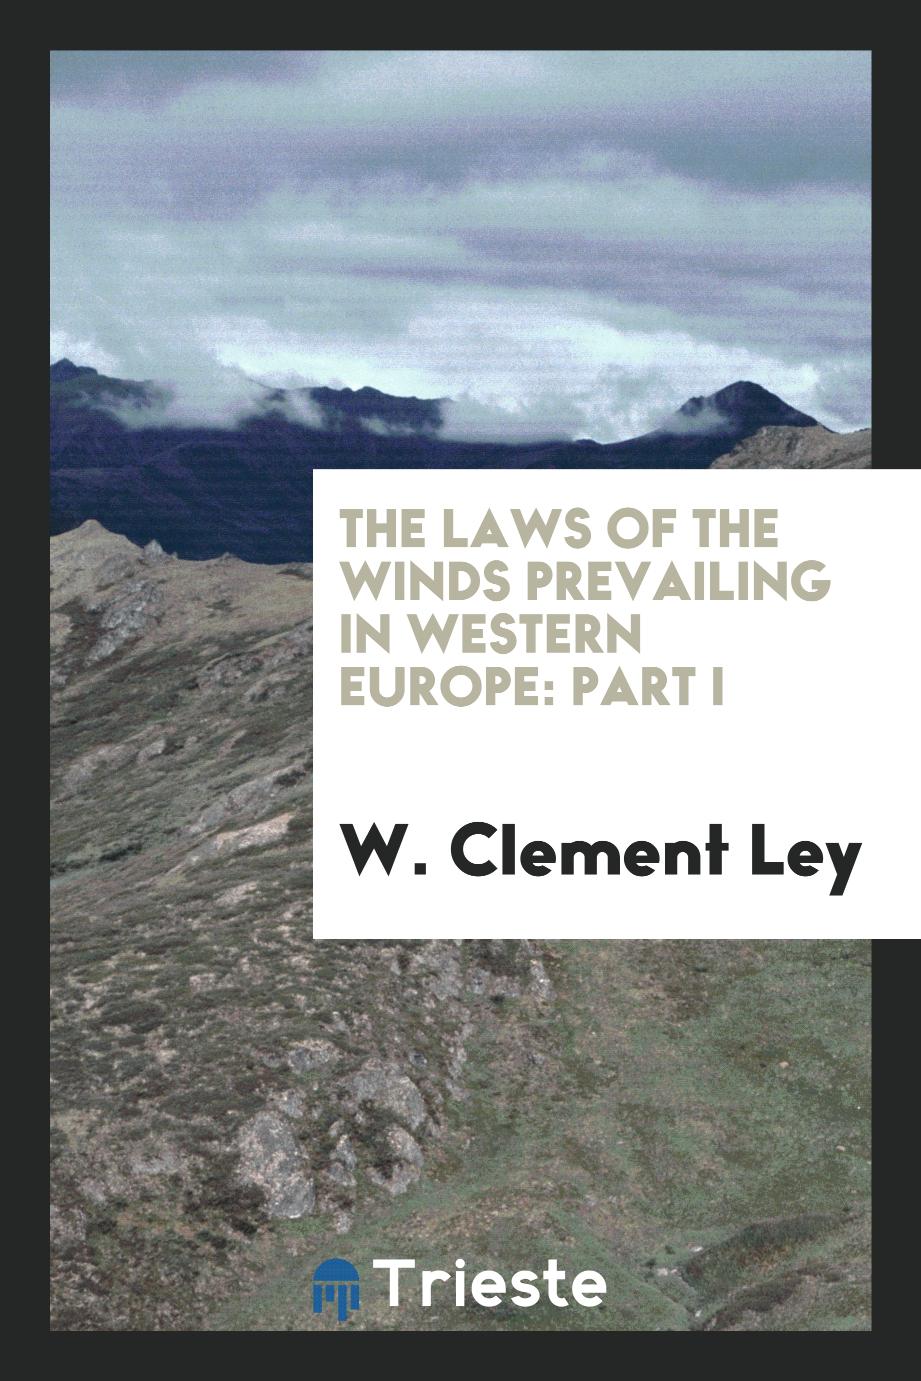 The Laws of the Winds Prevailing in Western Europe: Part I